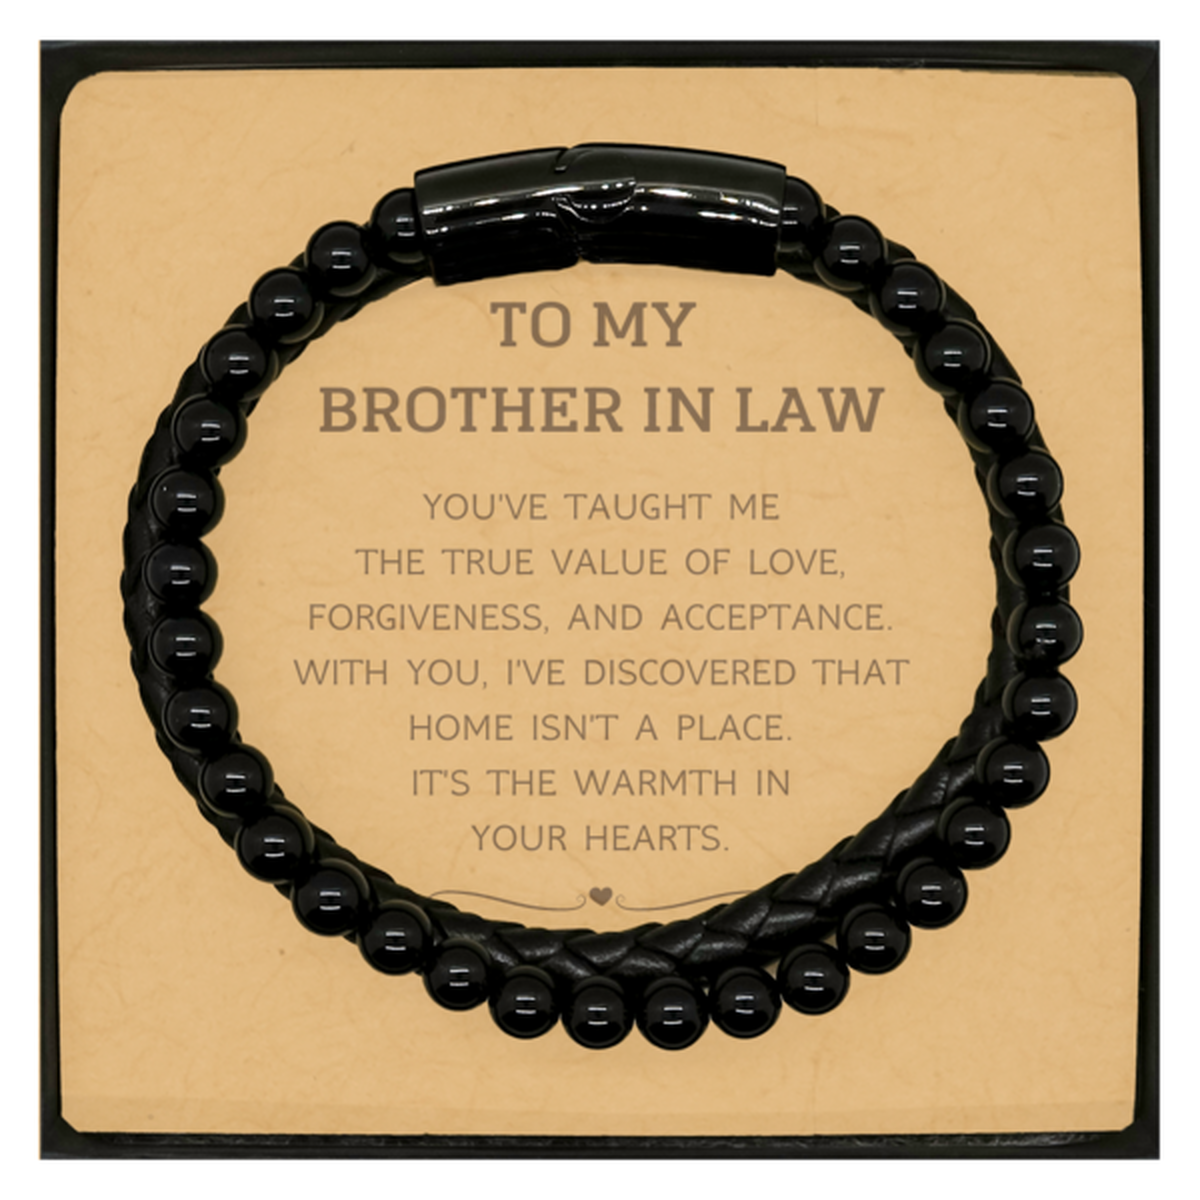 To My Brother In Law Gifts, You've taught me the true value of love, Thank You Gifts For Brother In Law, Birthday Christmas Stone Leather Bracelets For Brother In Law